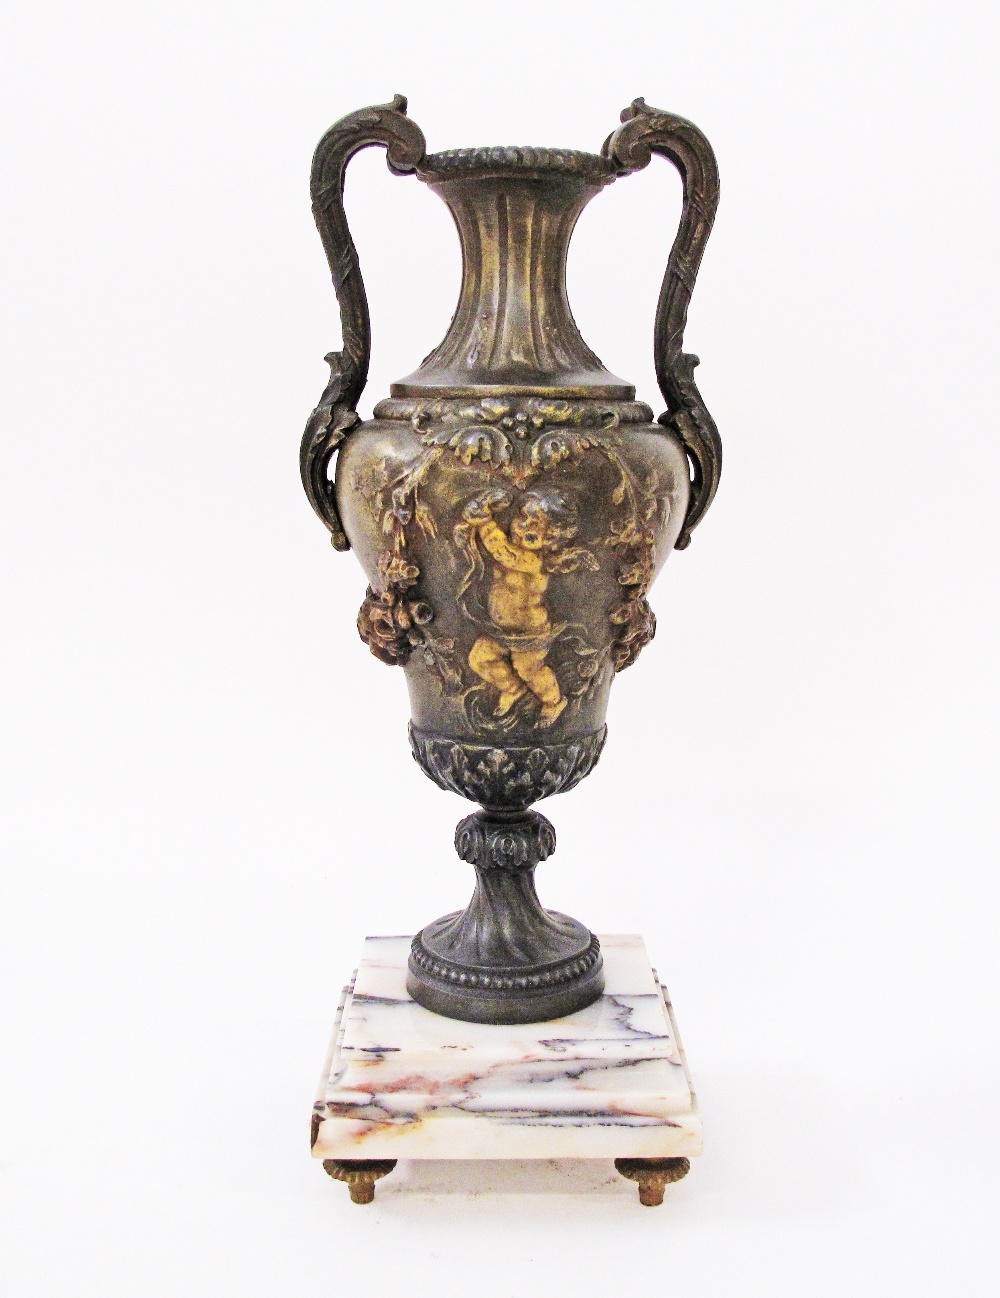 A French c19th century bronze vase on marble plinth.